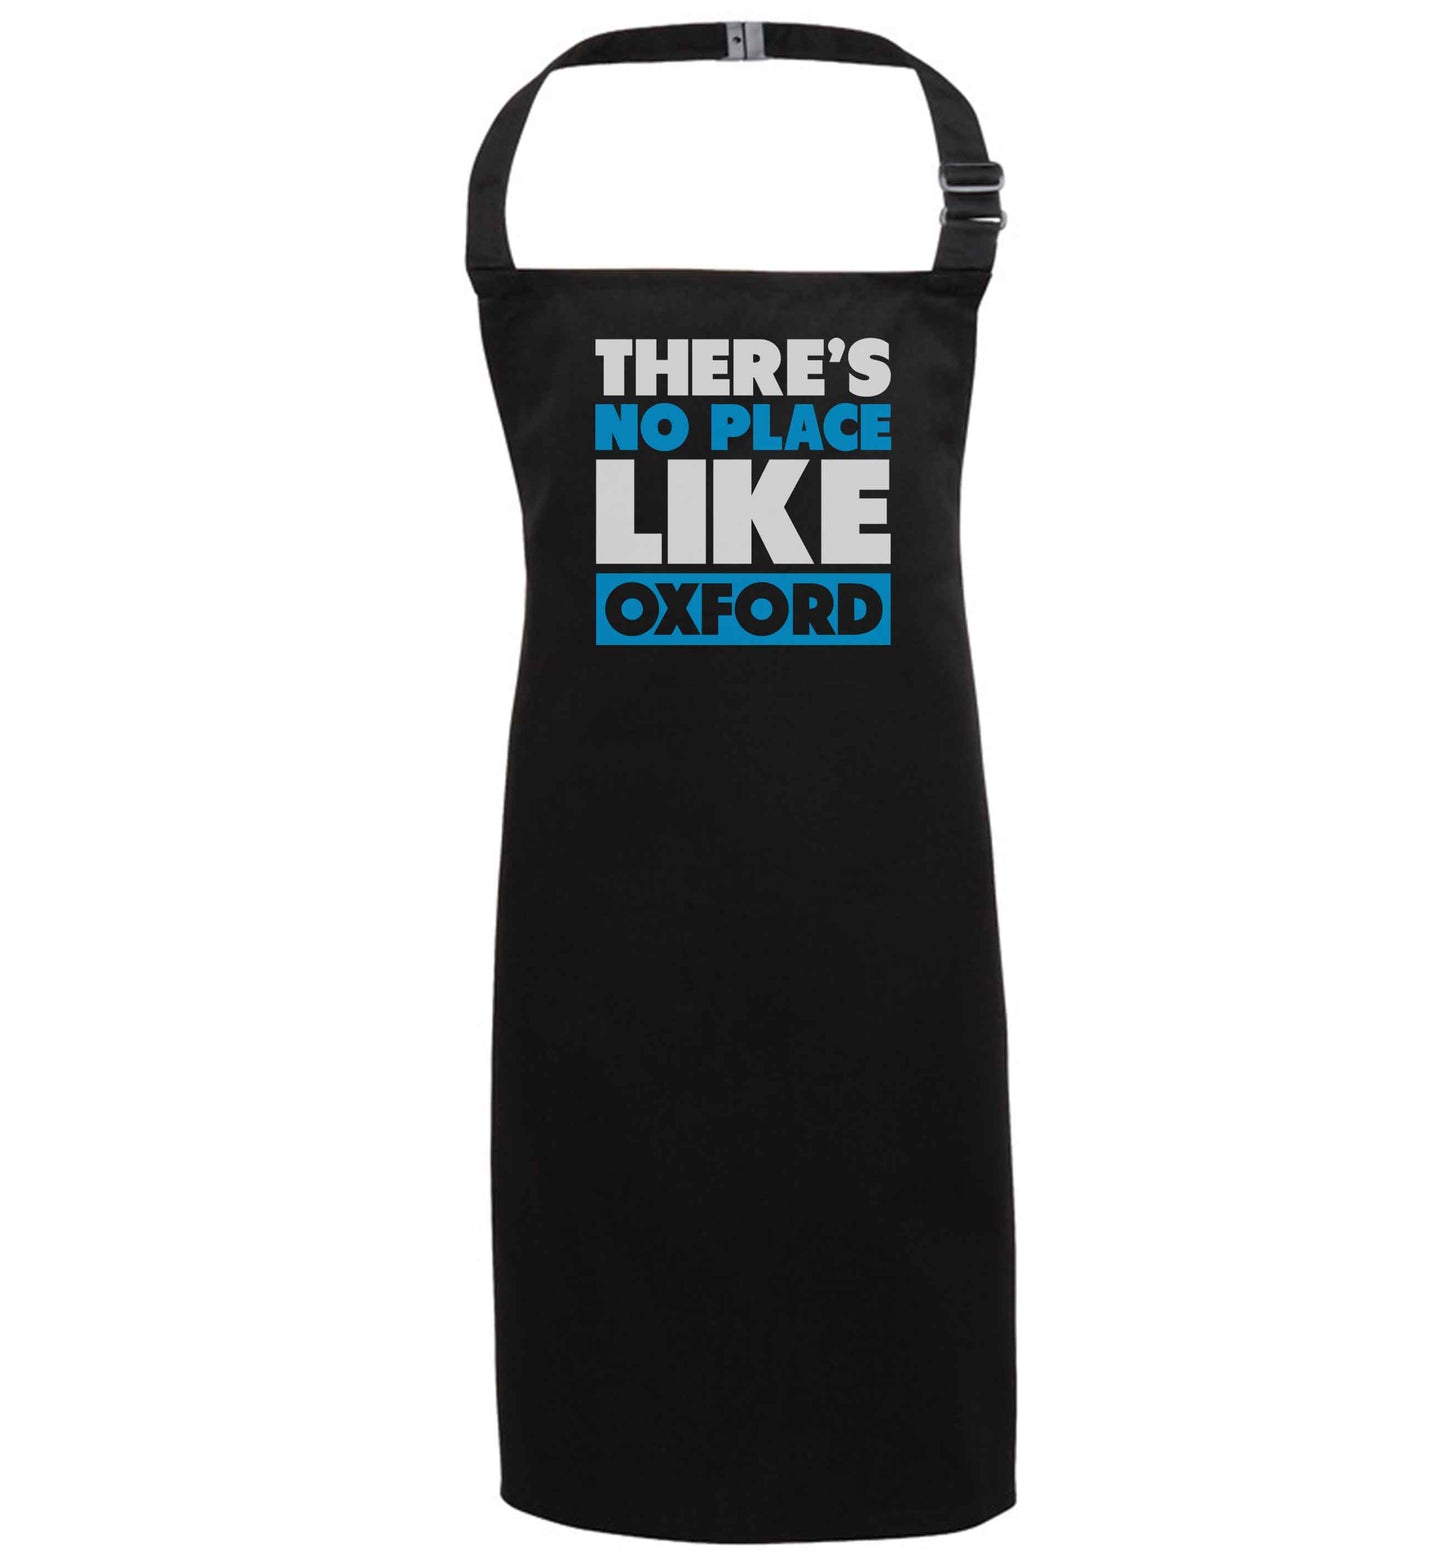 There's no place like Oxford black apron 7-10 years